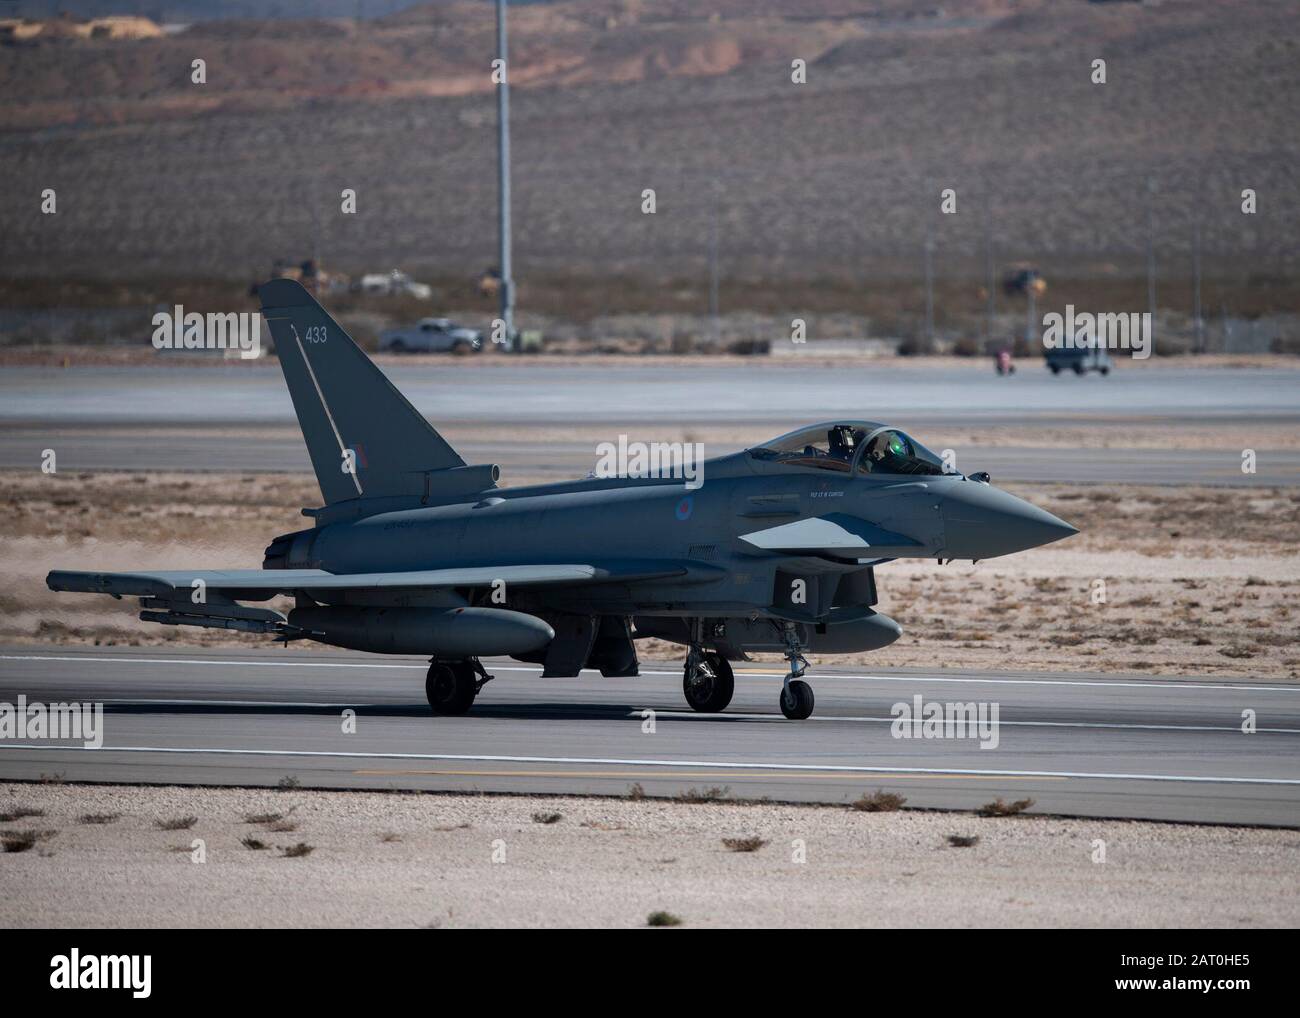 A Royal Air Force (RAF) Typhoon FGR 4 assigned to the 41st Squadron (SQN), RAF Waddington, lands at Nellis Air Force Base, Nevada, Jan. 23, 2019. The RAF has a long working history with the United States Military dating back to the first World War. (U.S. Air Force photo by Airman 1st Class Bryan Guthrie) Stock Photo